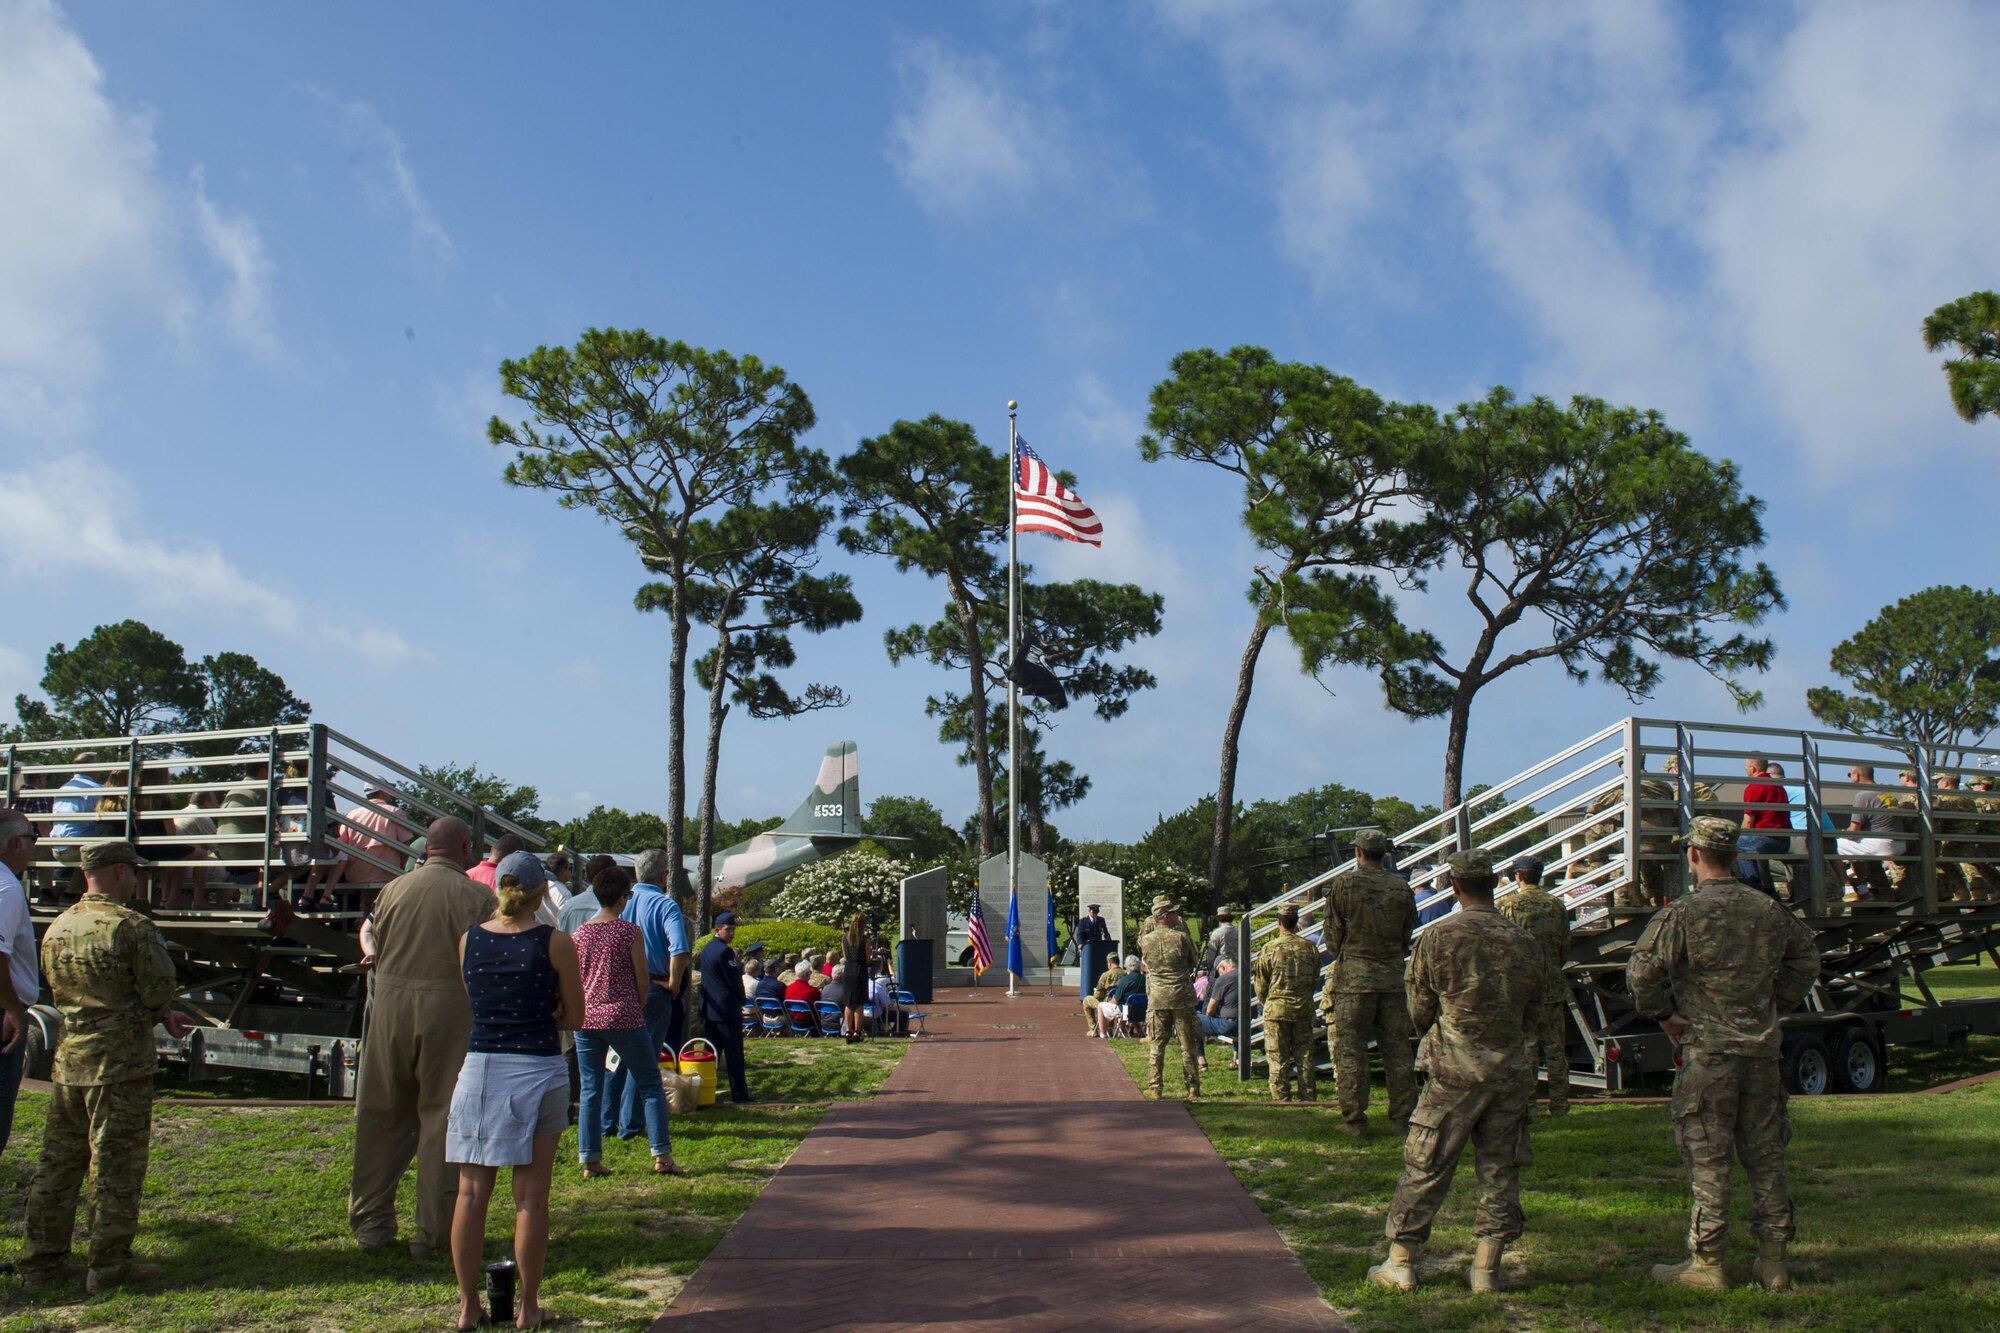 Air Commandos attend the Operation Eagle Claw memorial ceremony at Hurlburt Field, Fla., June 23, 2017. Operation Eagle Claw was an attempted hostage-rescue mission in 1980 that resulted in five, 8th Special Operations Squadron Airmen and three Marines sacrificing their lives when two of the involved aircraft collided at the Desert One staging site. (U.S. Air Force photo by Airman 1st Class Joseph Pick)